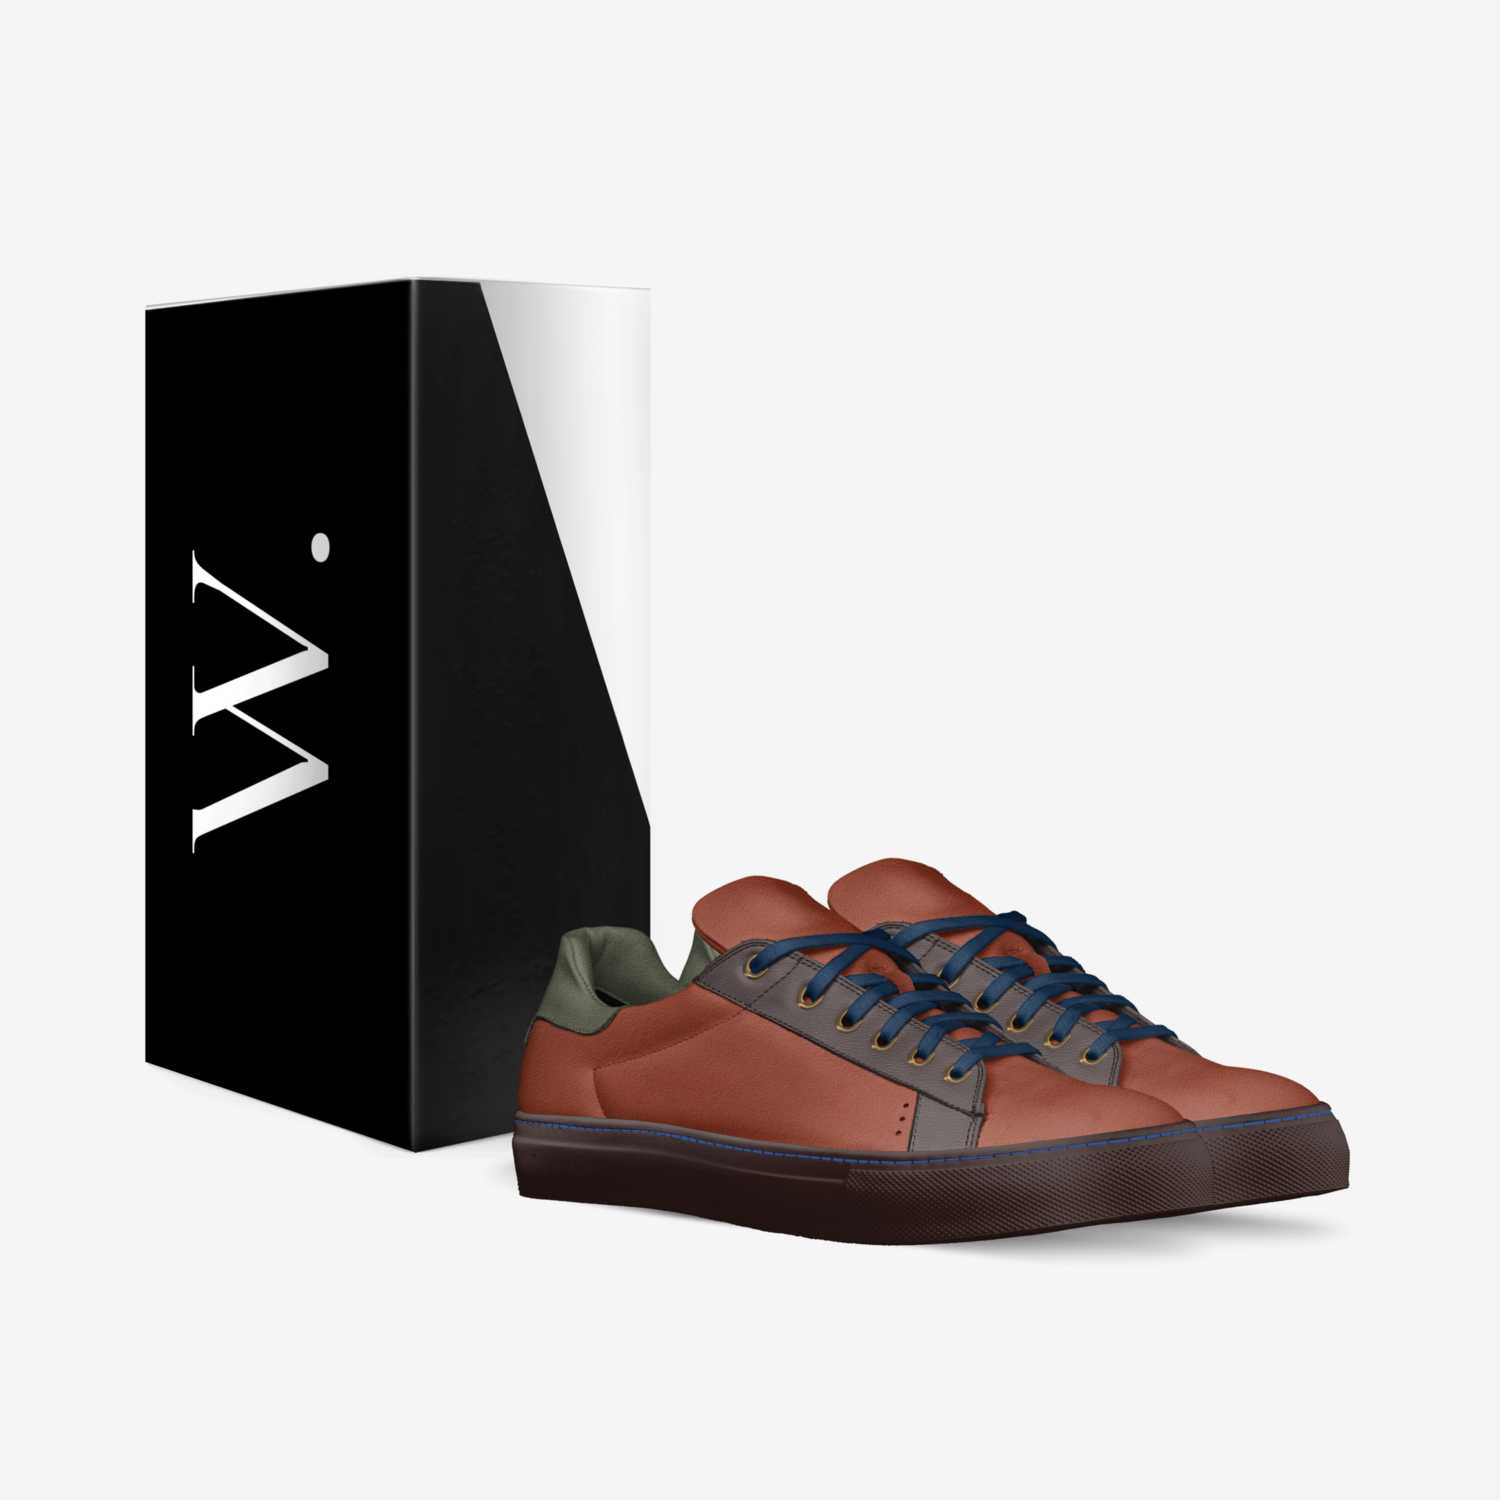 W. custom made in Italy shoes by Robert W. | Box view